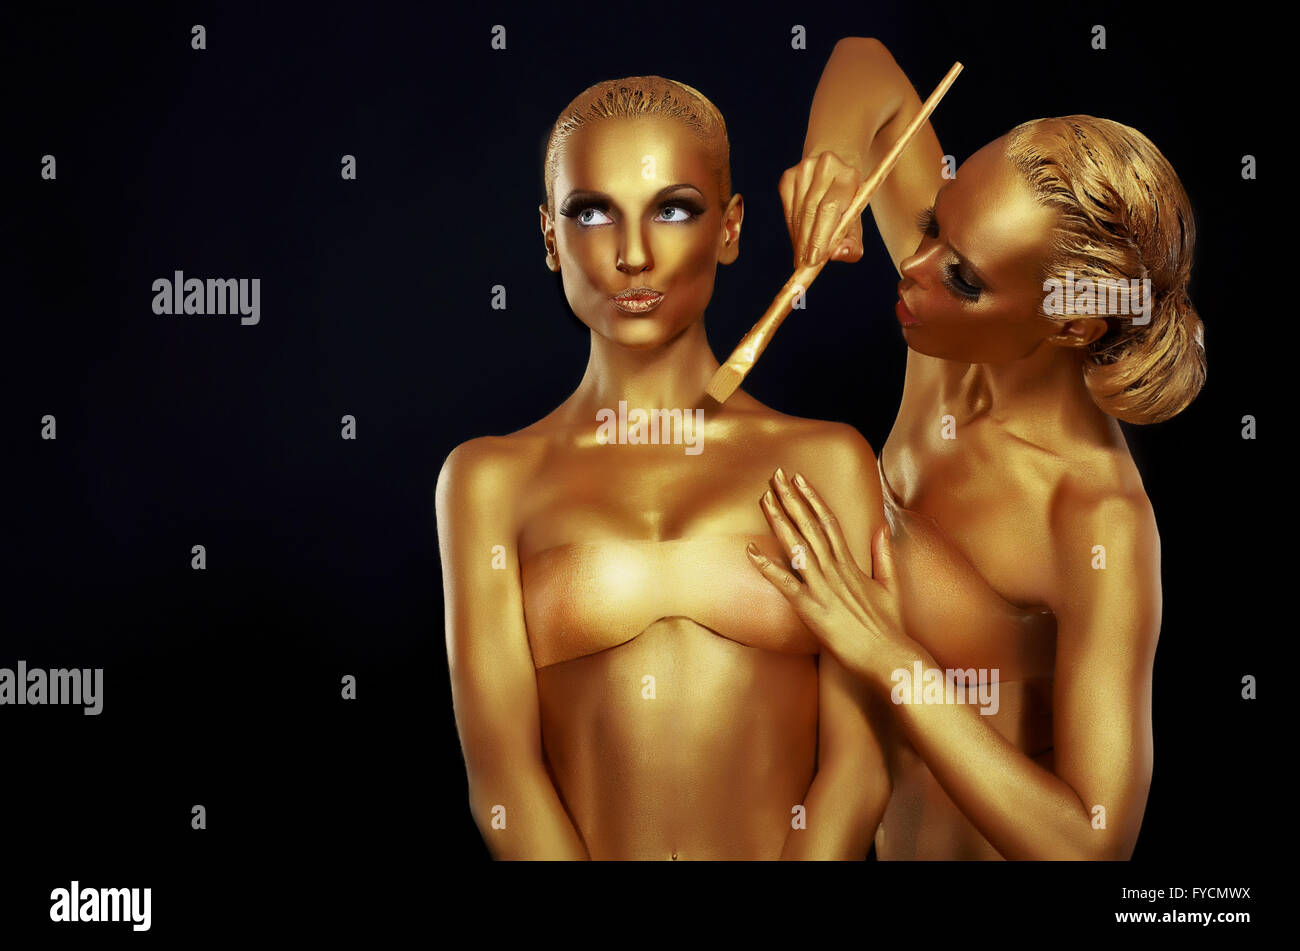 Two women painted in gold paint. Stock Photo